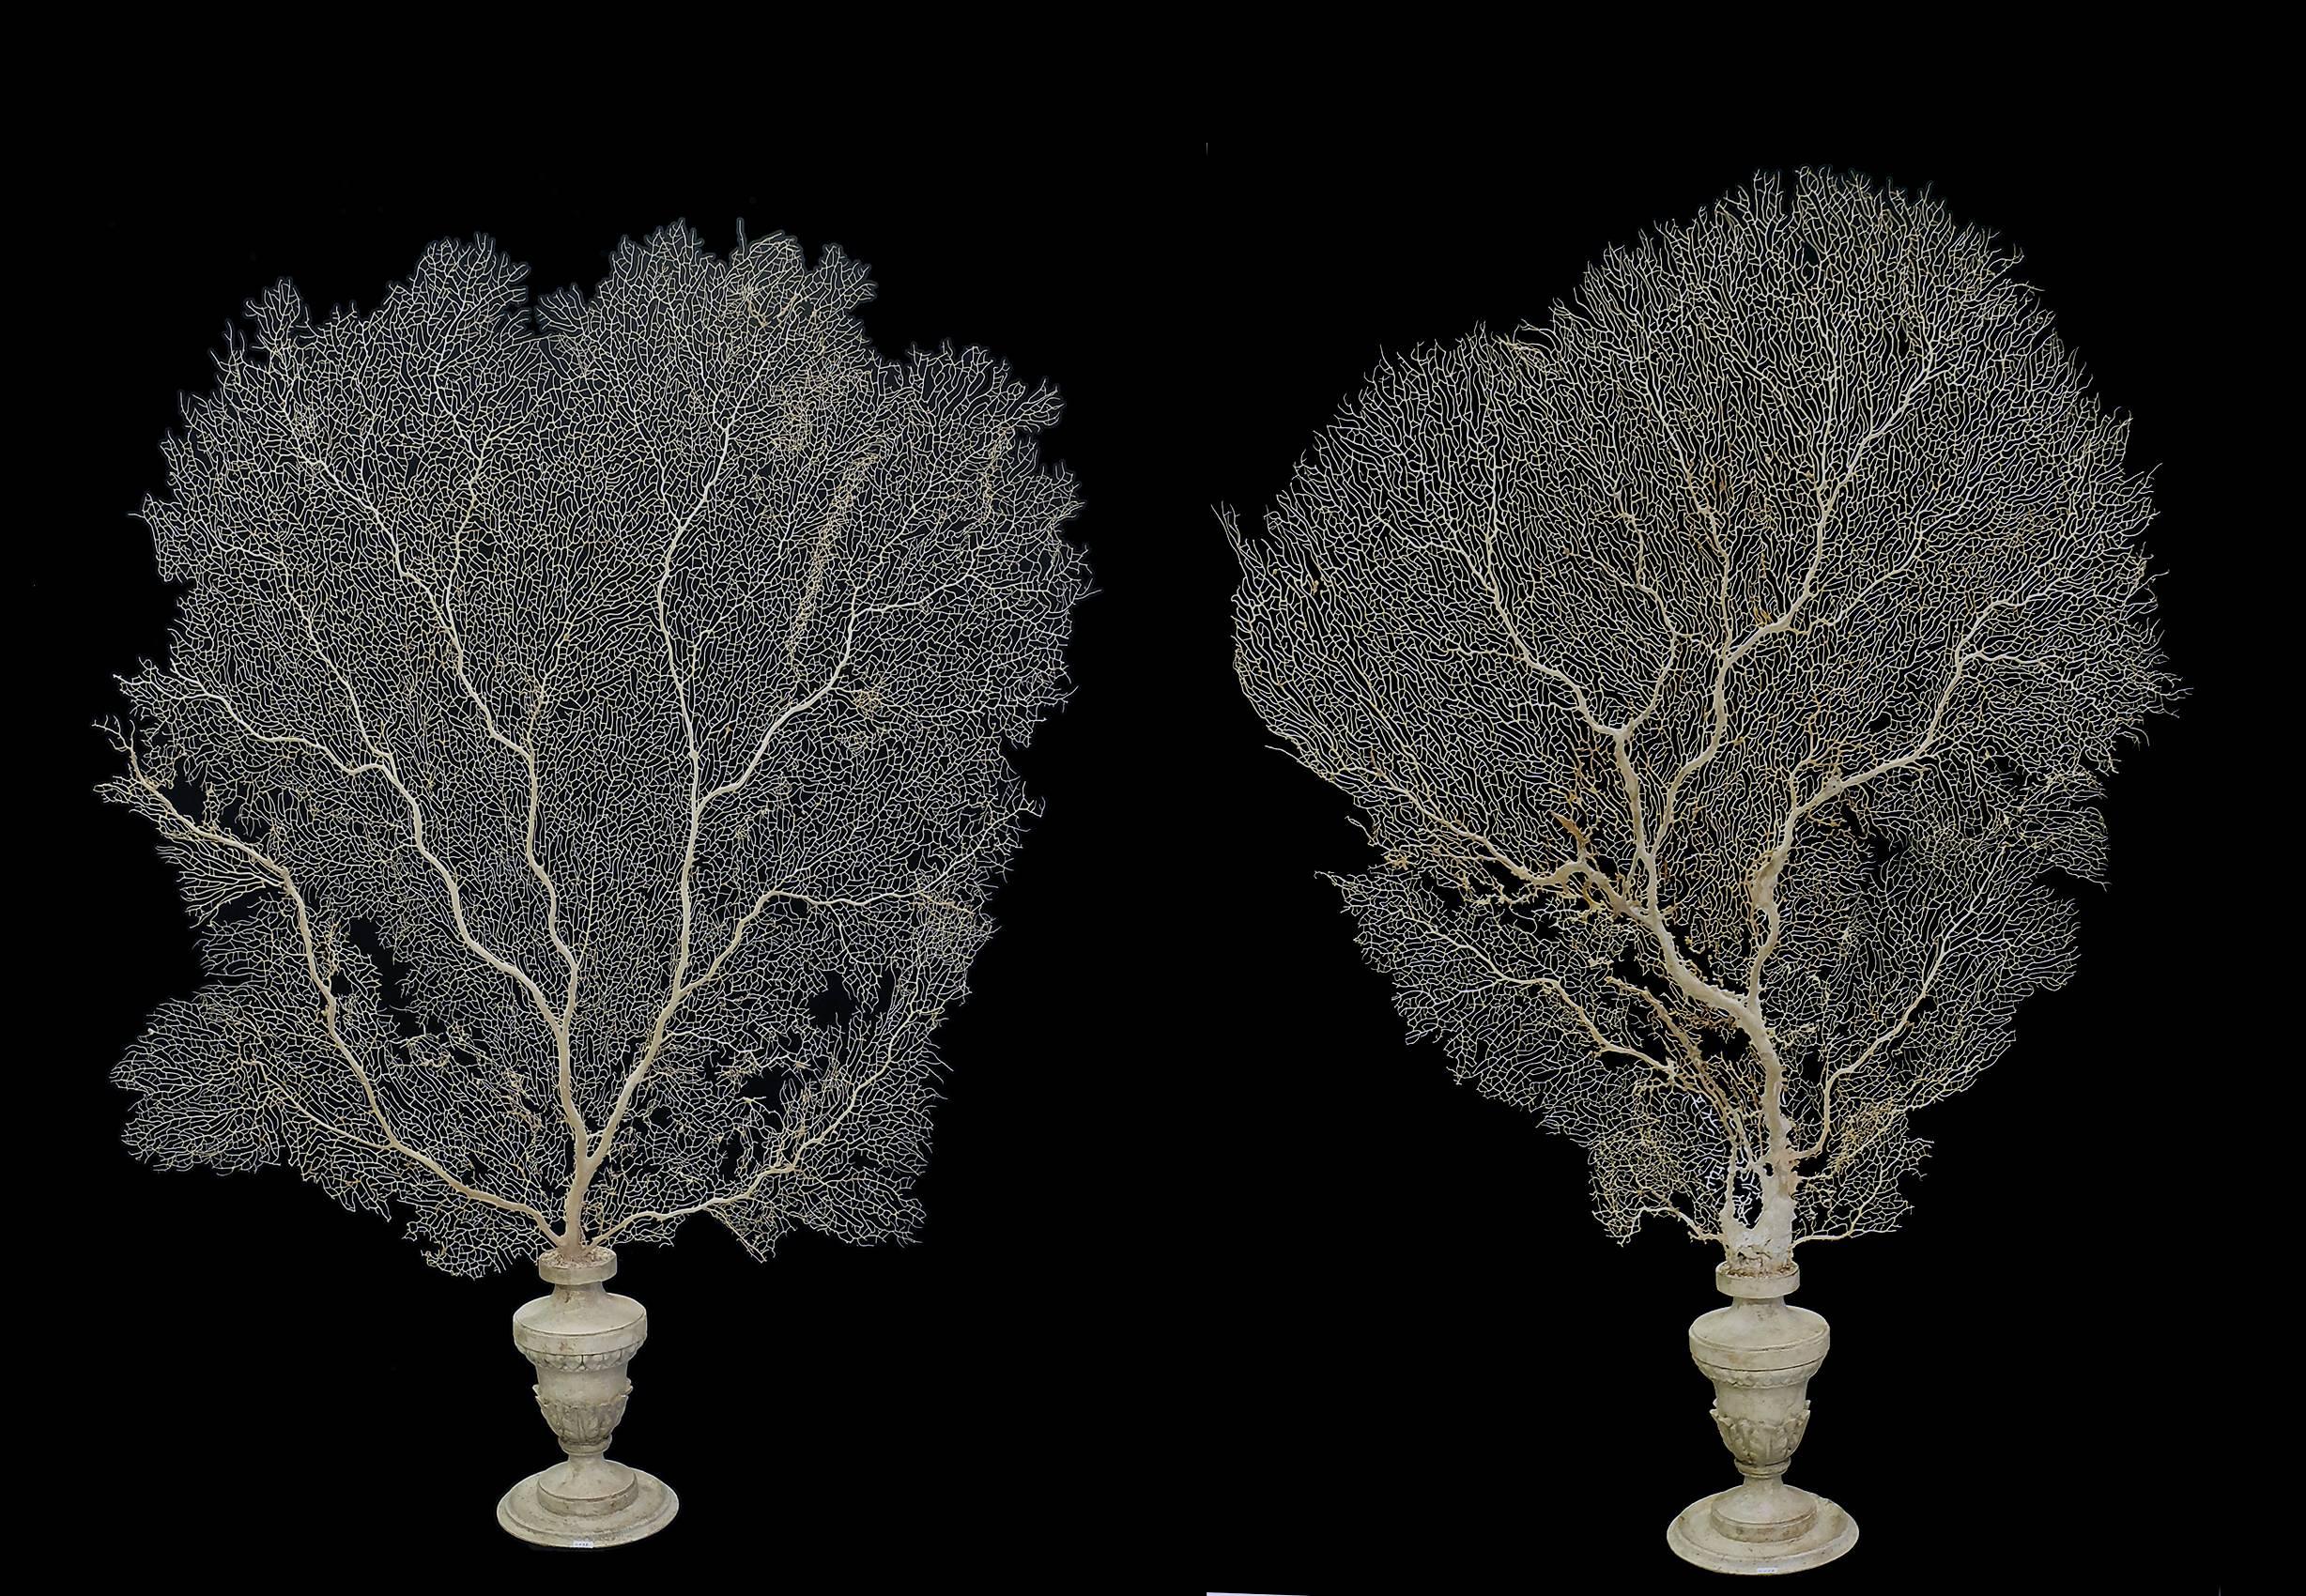 A beautiful and unusual pair of Wunderkammer Specimens. The plinths are made out of white wood (vase shape). Over the base, exceptionally wide and tall branches of natural pale beautiful yellow horny coral natural specimen. The price is intended for